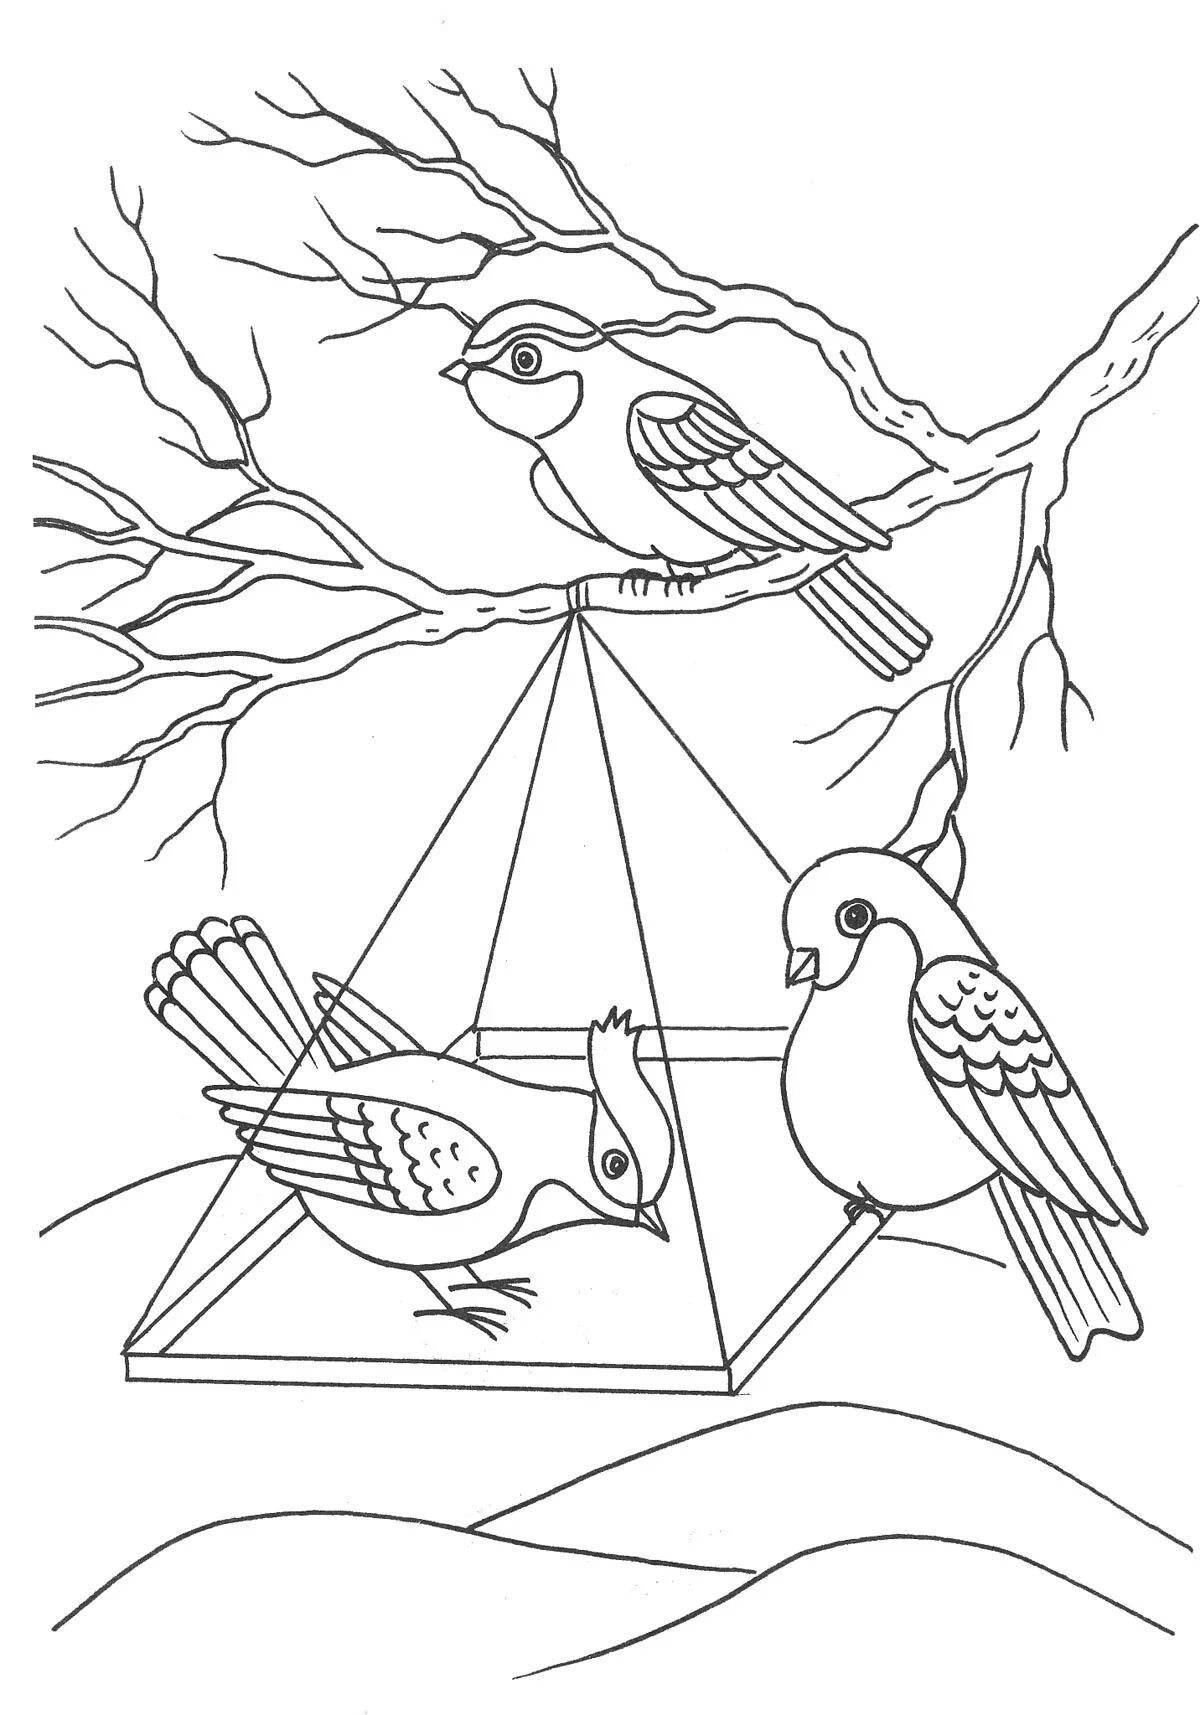 Comforting coloring: how to help birds in winter